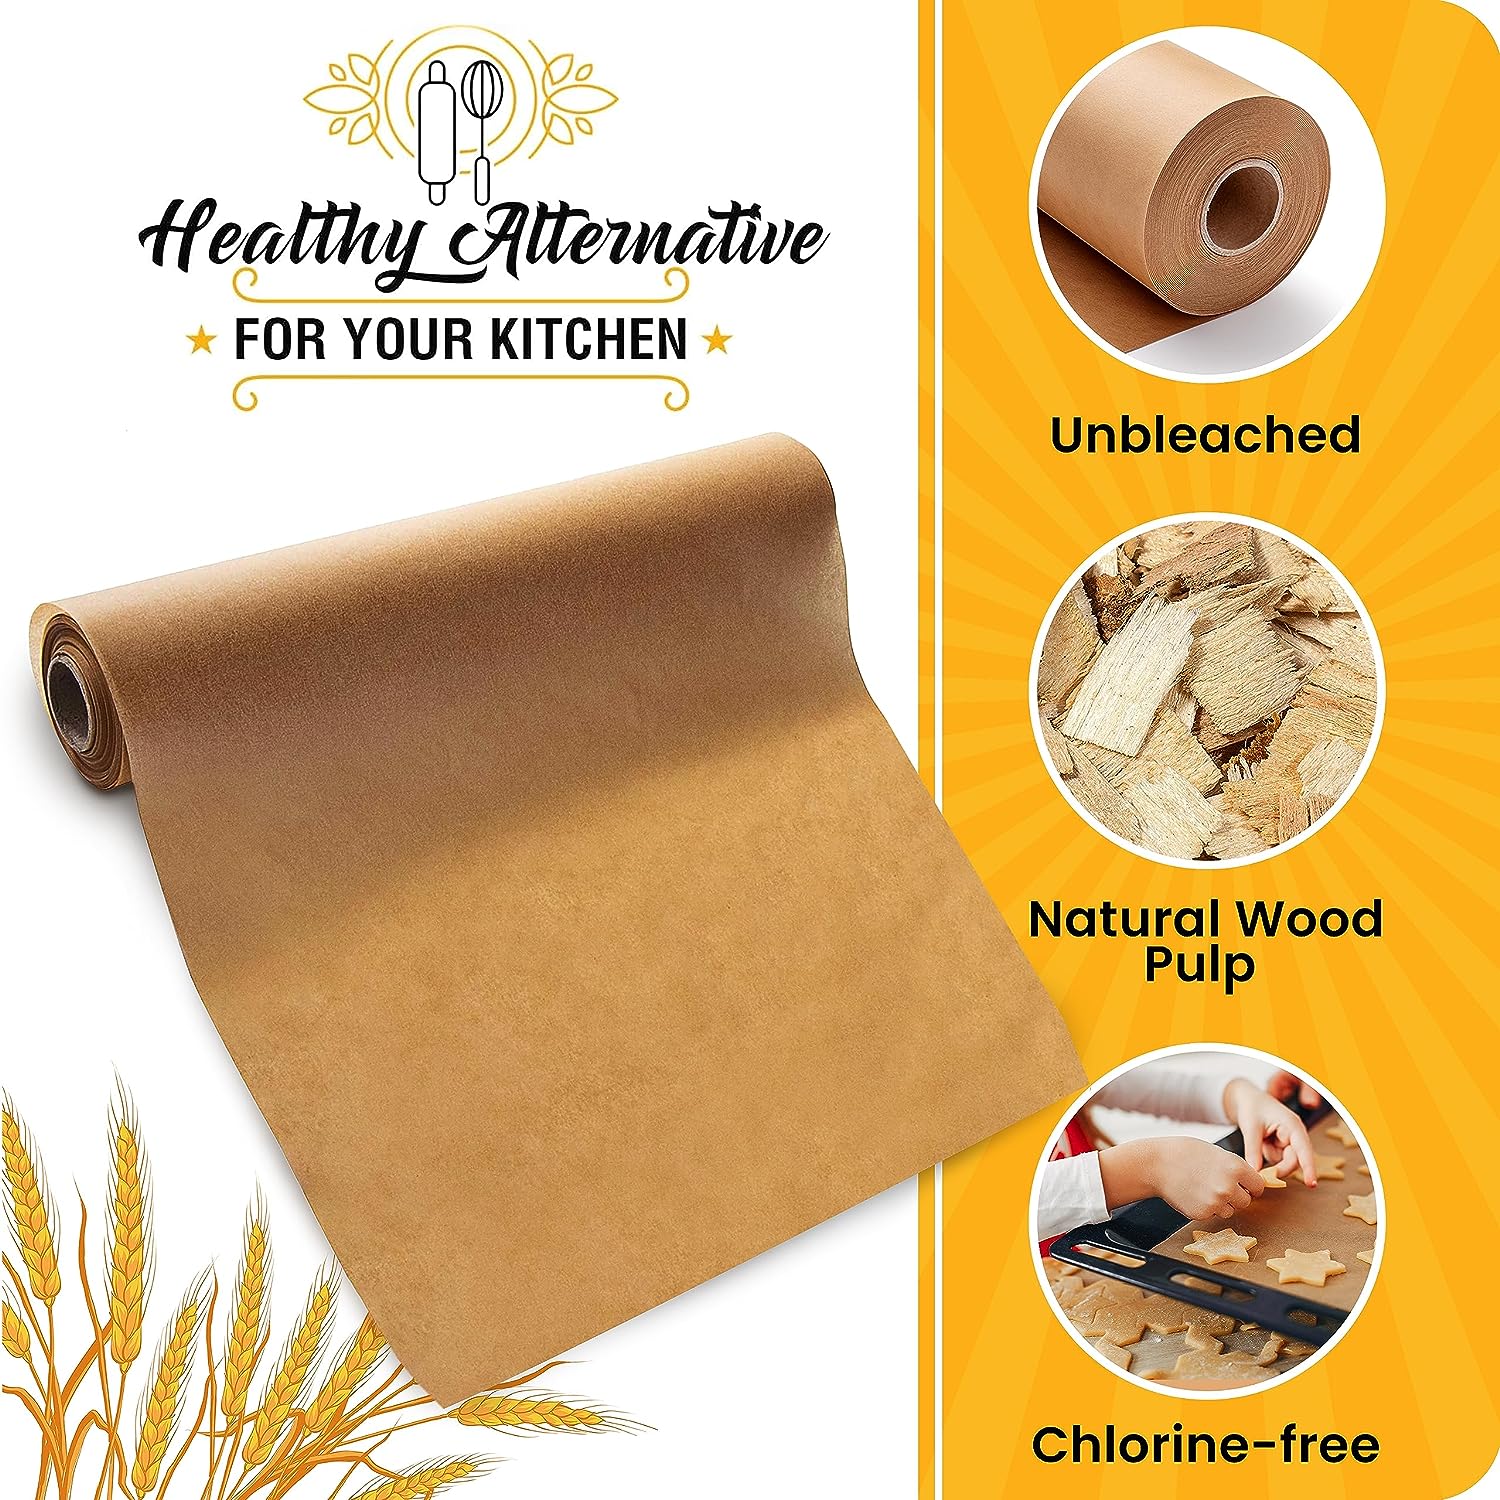 Unbleached Parchment Paper Roll for Baking, 13 in x 164 Ft, 177 Sq.Ft,  Baklicious Non-stick Baking Parchment Paper for Baking, Cookies, Bread,  Oven